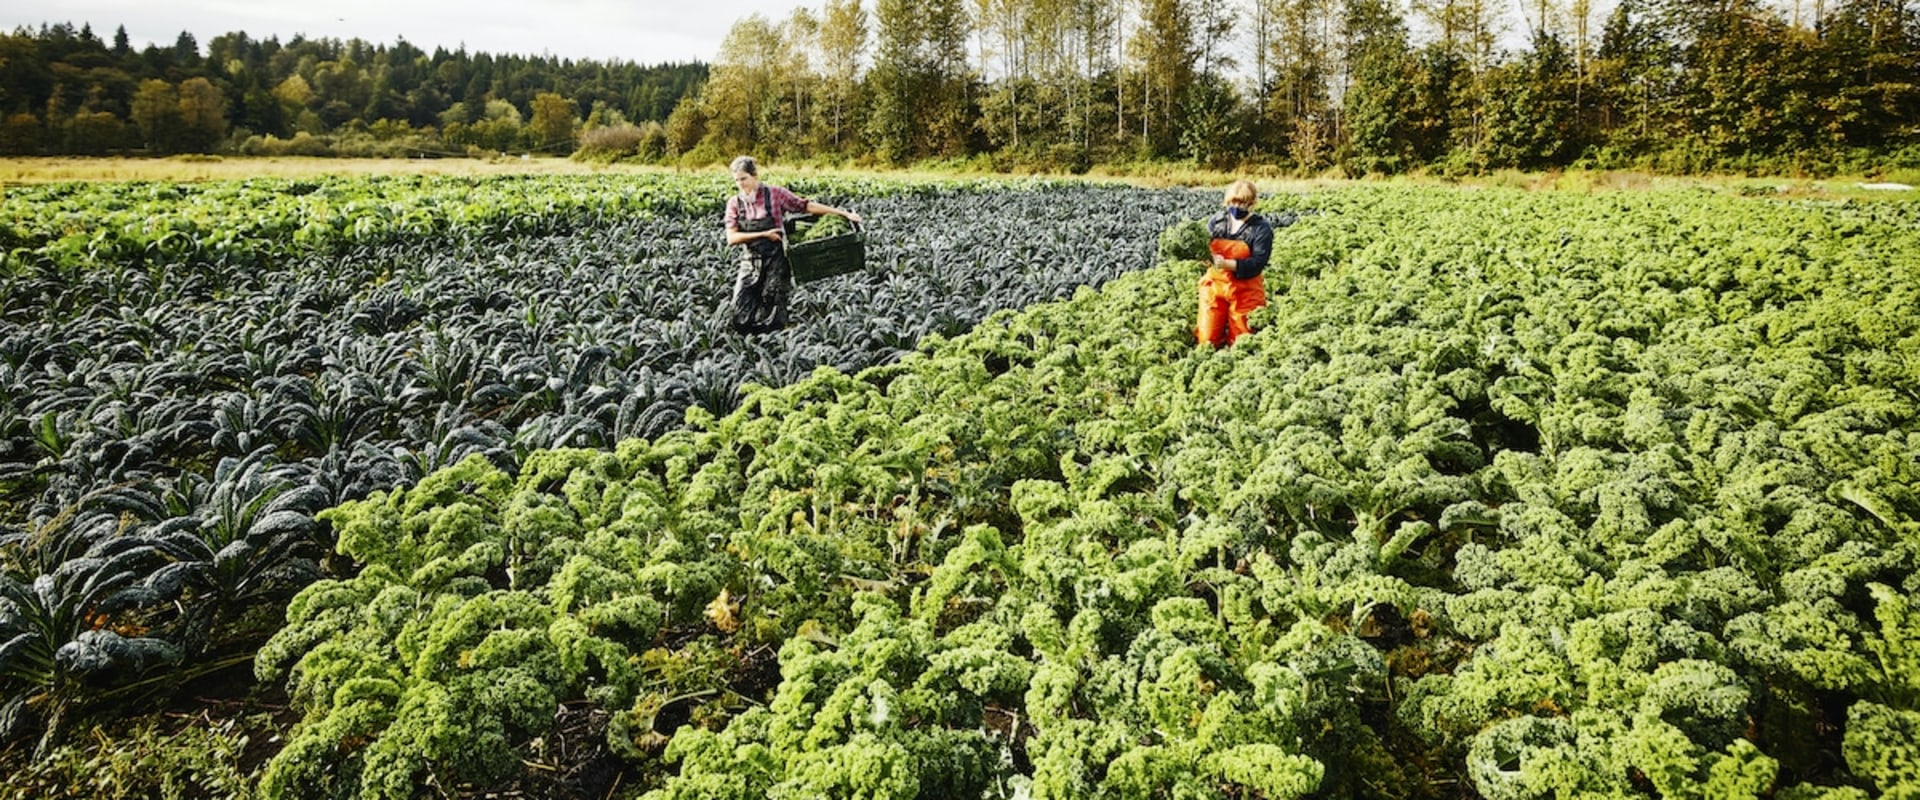 The Power of Sustainable Agriculture: An Expert's Perspective